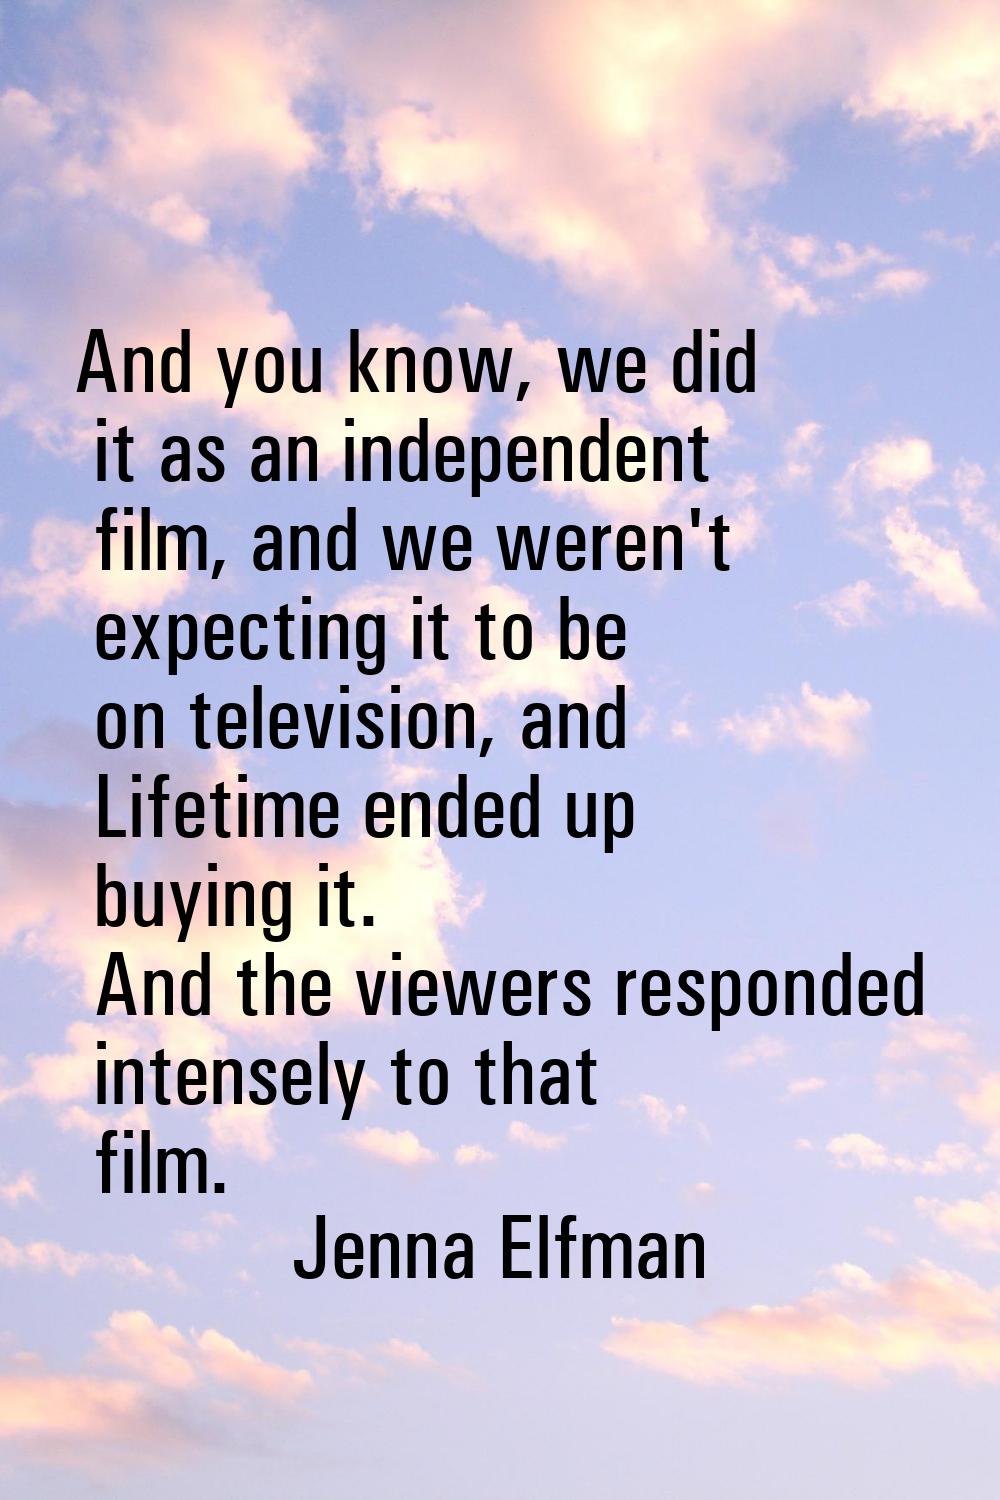 And you know, we did it as an independent film, and we weren't expecting it to be on television, an